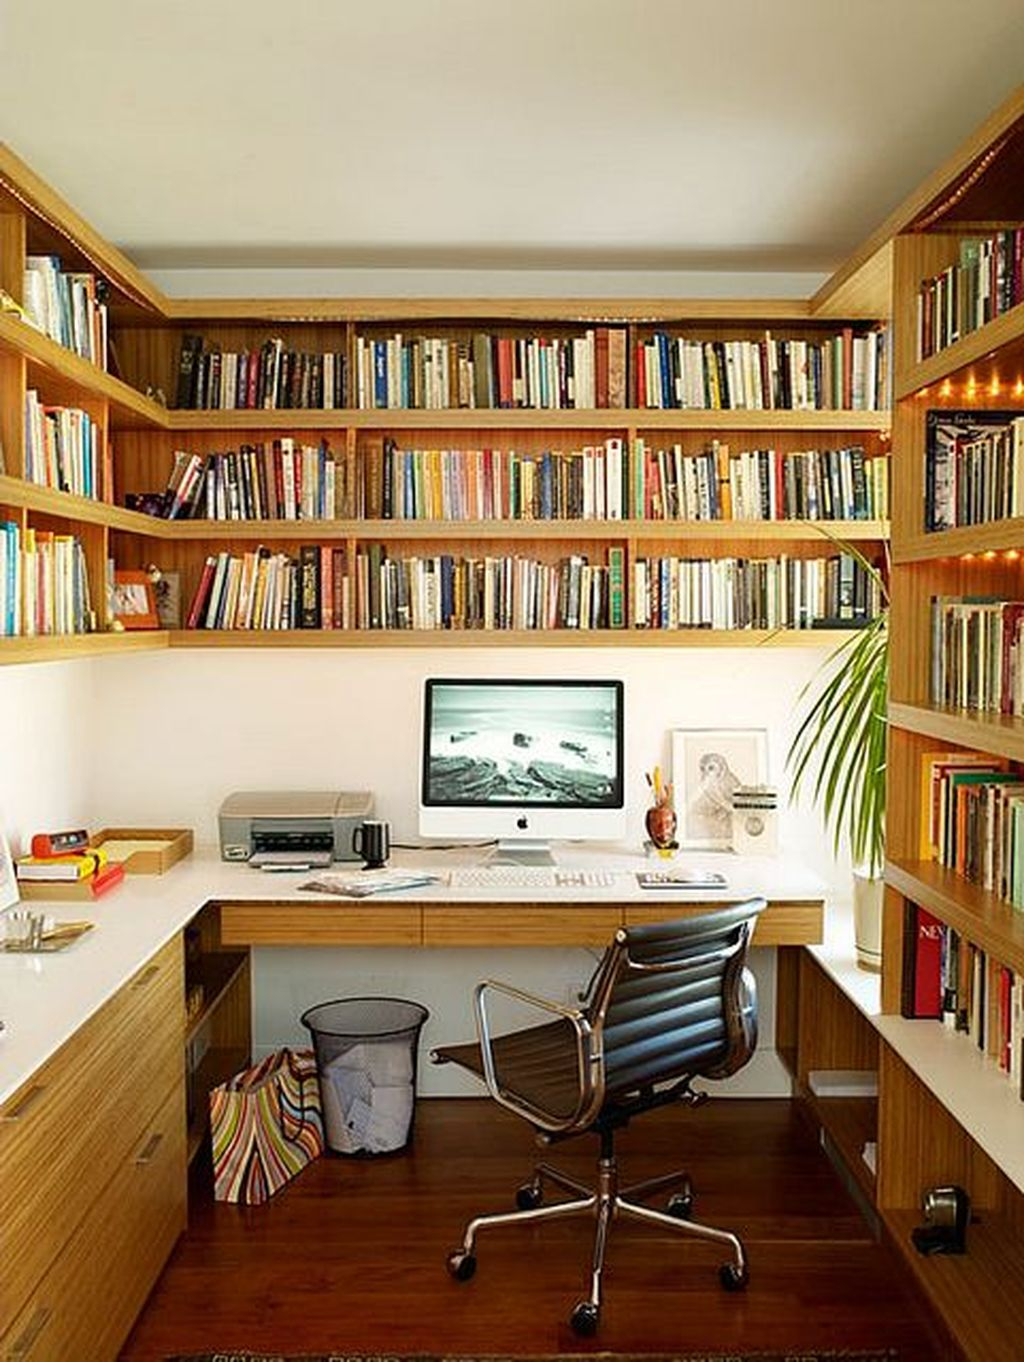 Diy Awesome Home Office Organizing Ideas44